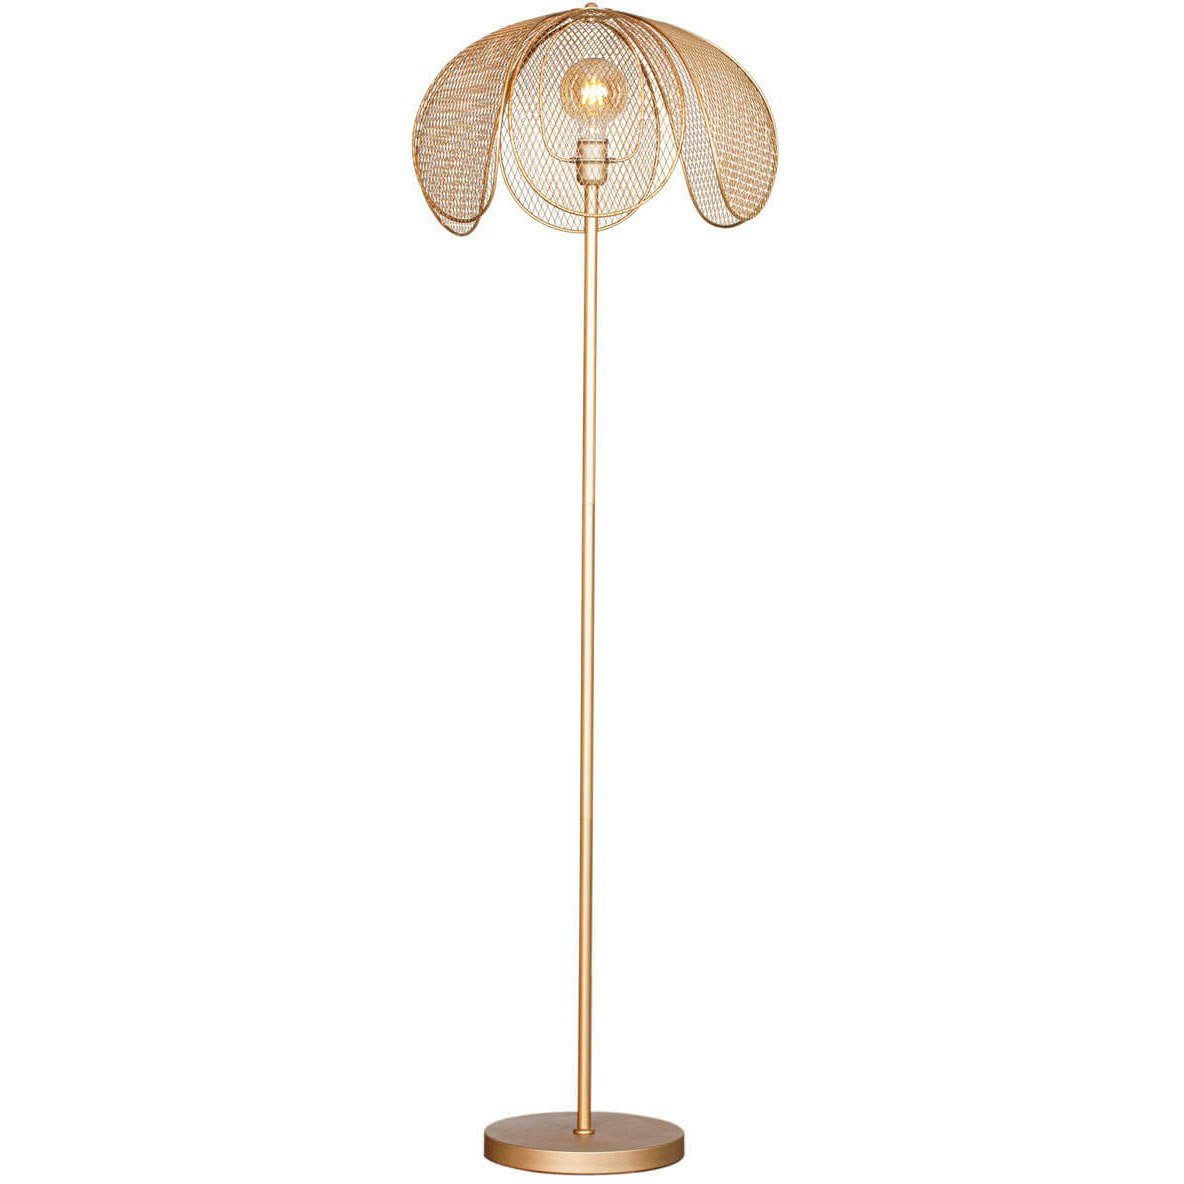 Daisy Stehlampe, Gold